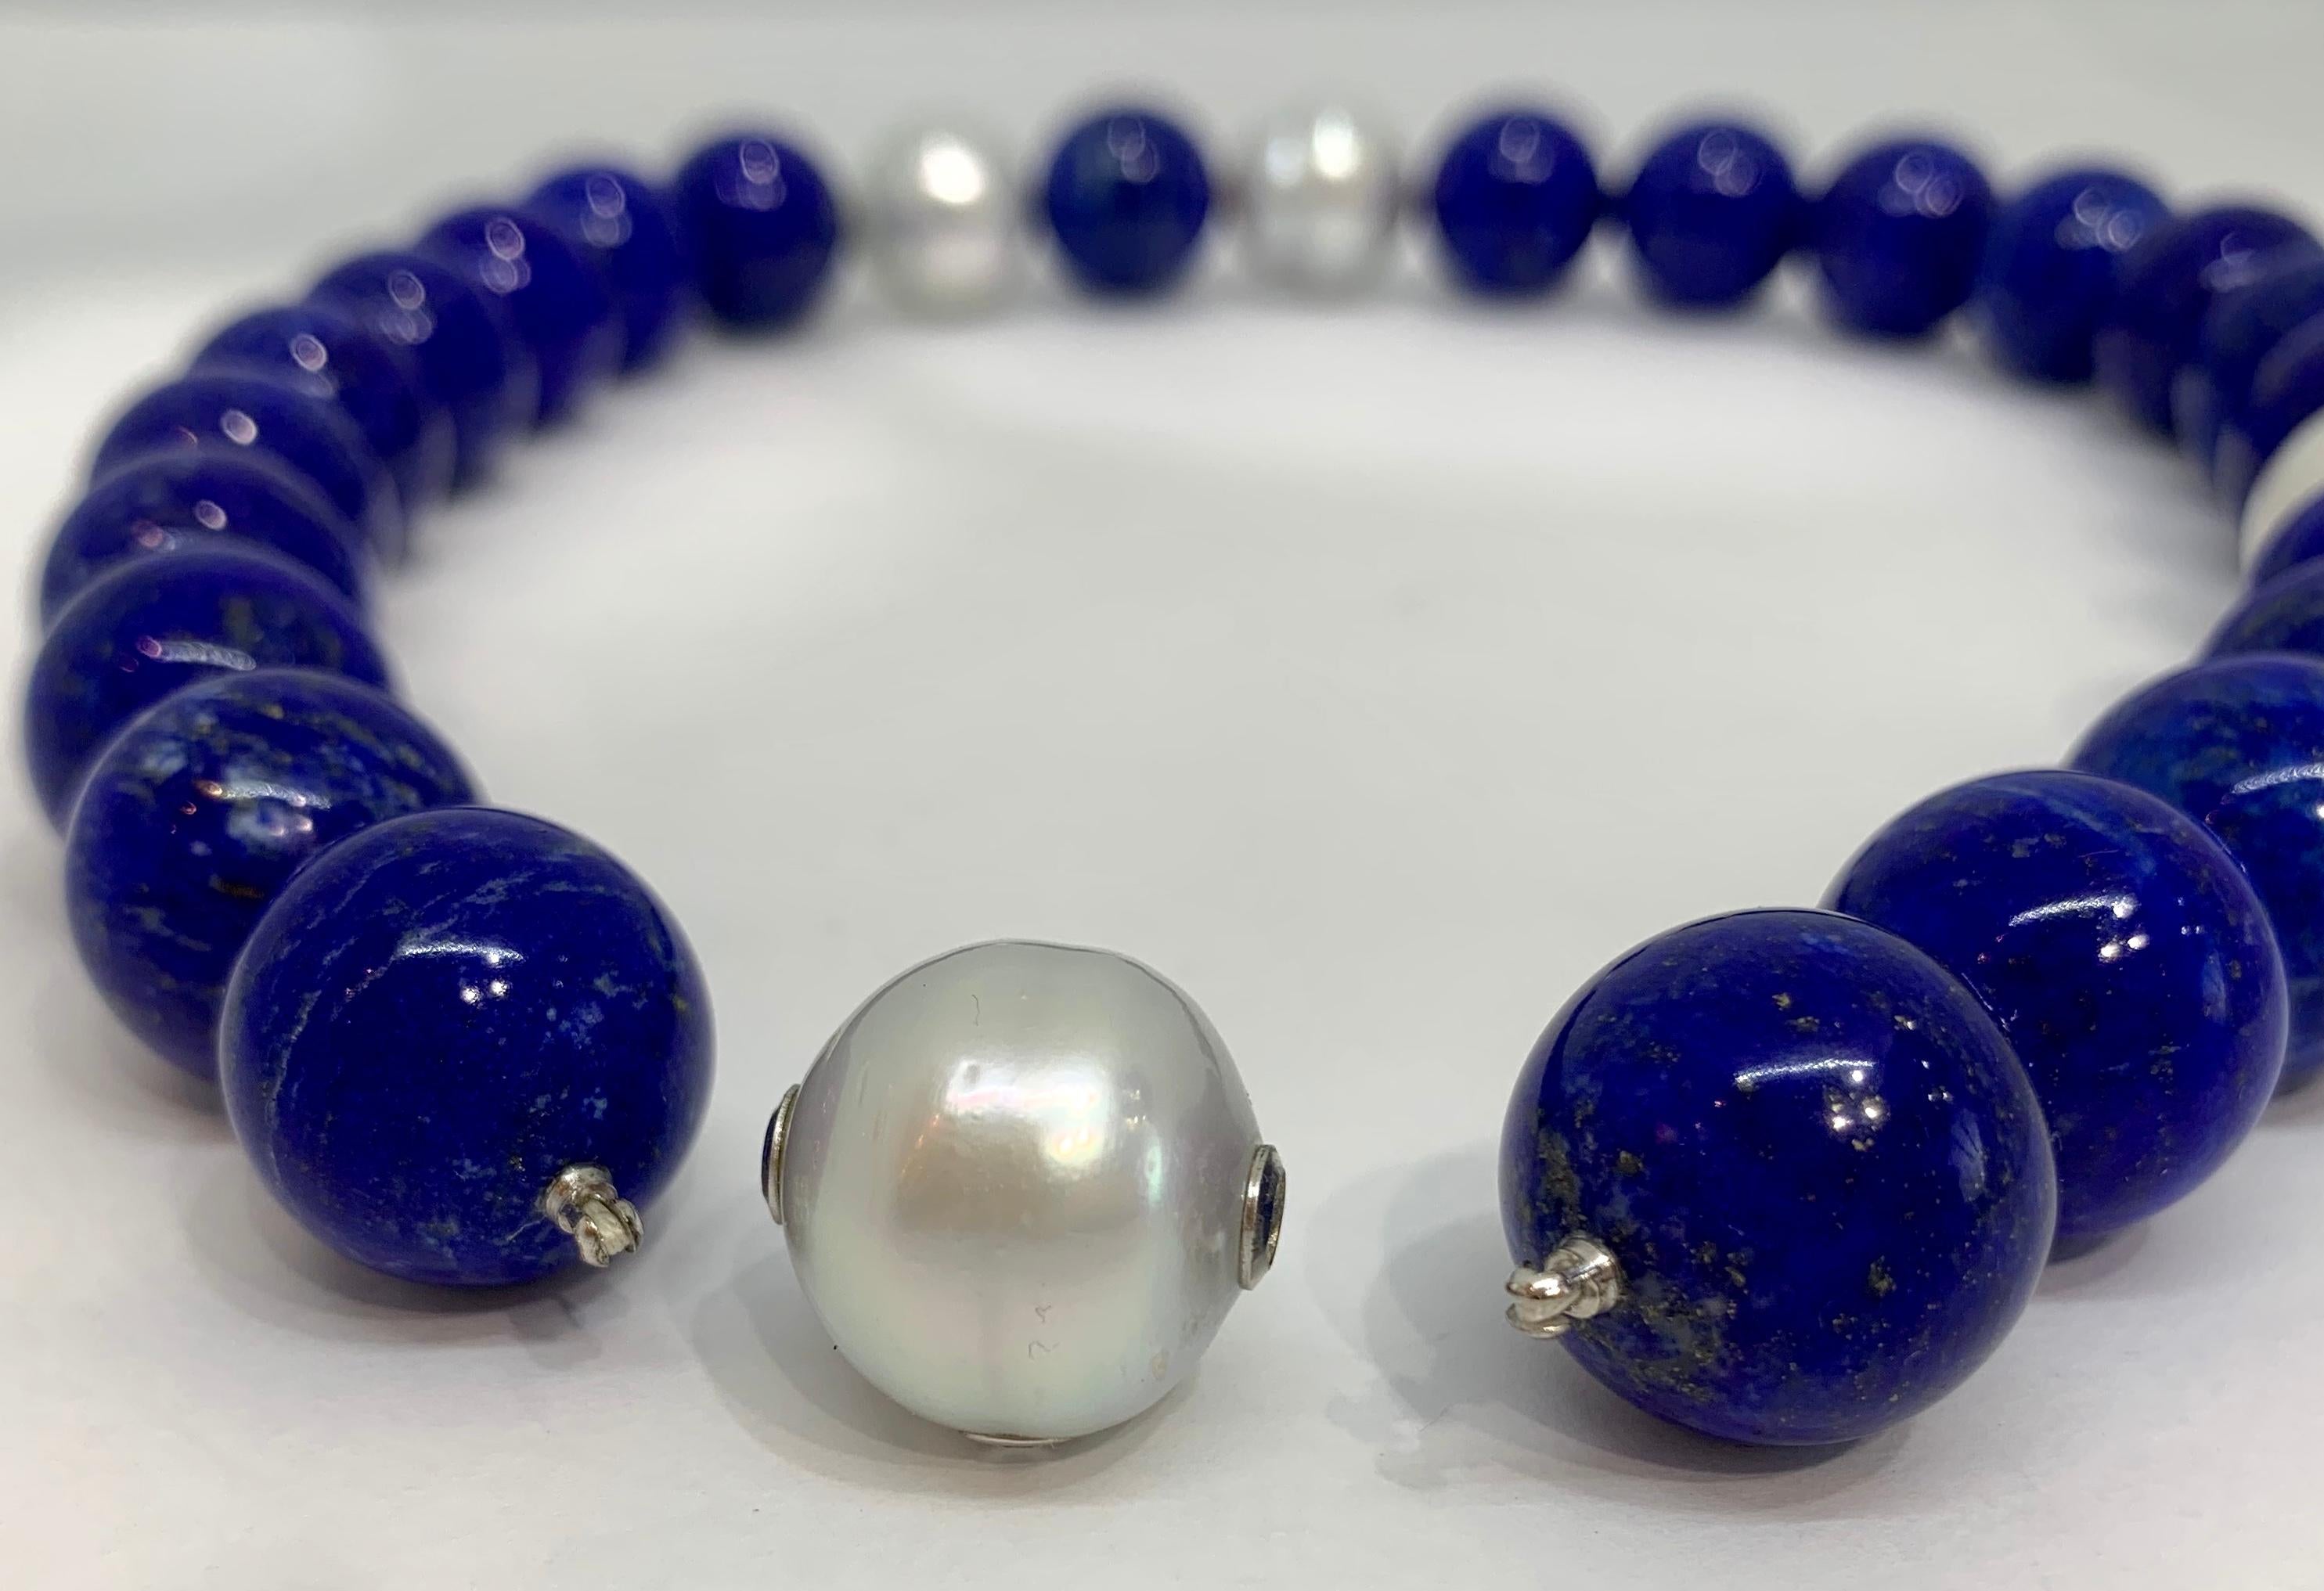 Margot McKinney 18 Karat White Gold Pearl and Lapis Necklet featuring four White Circle 17mm - 18mm Australian South Sea Pearls and twenty-three 18mm Lapis Lazuli Beads, Length 49cm.  Clasp is an interchangeable 17mm - 17.5mm Pearl with an 0.10ct